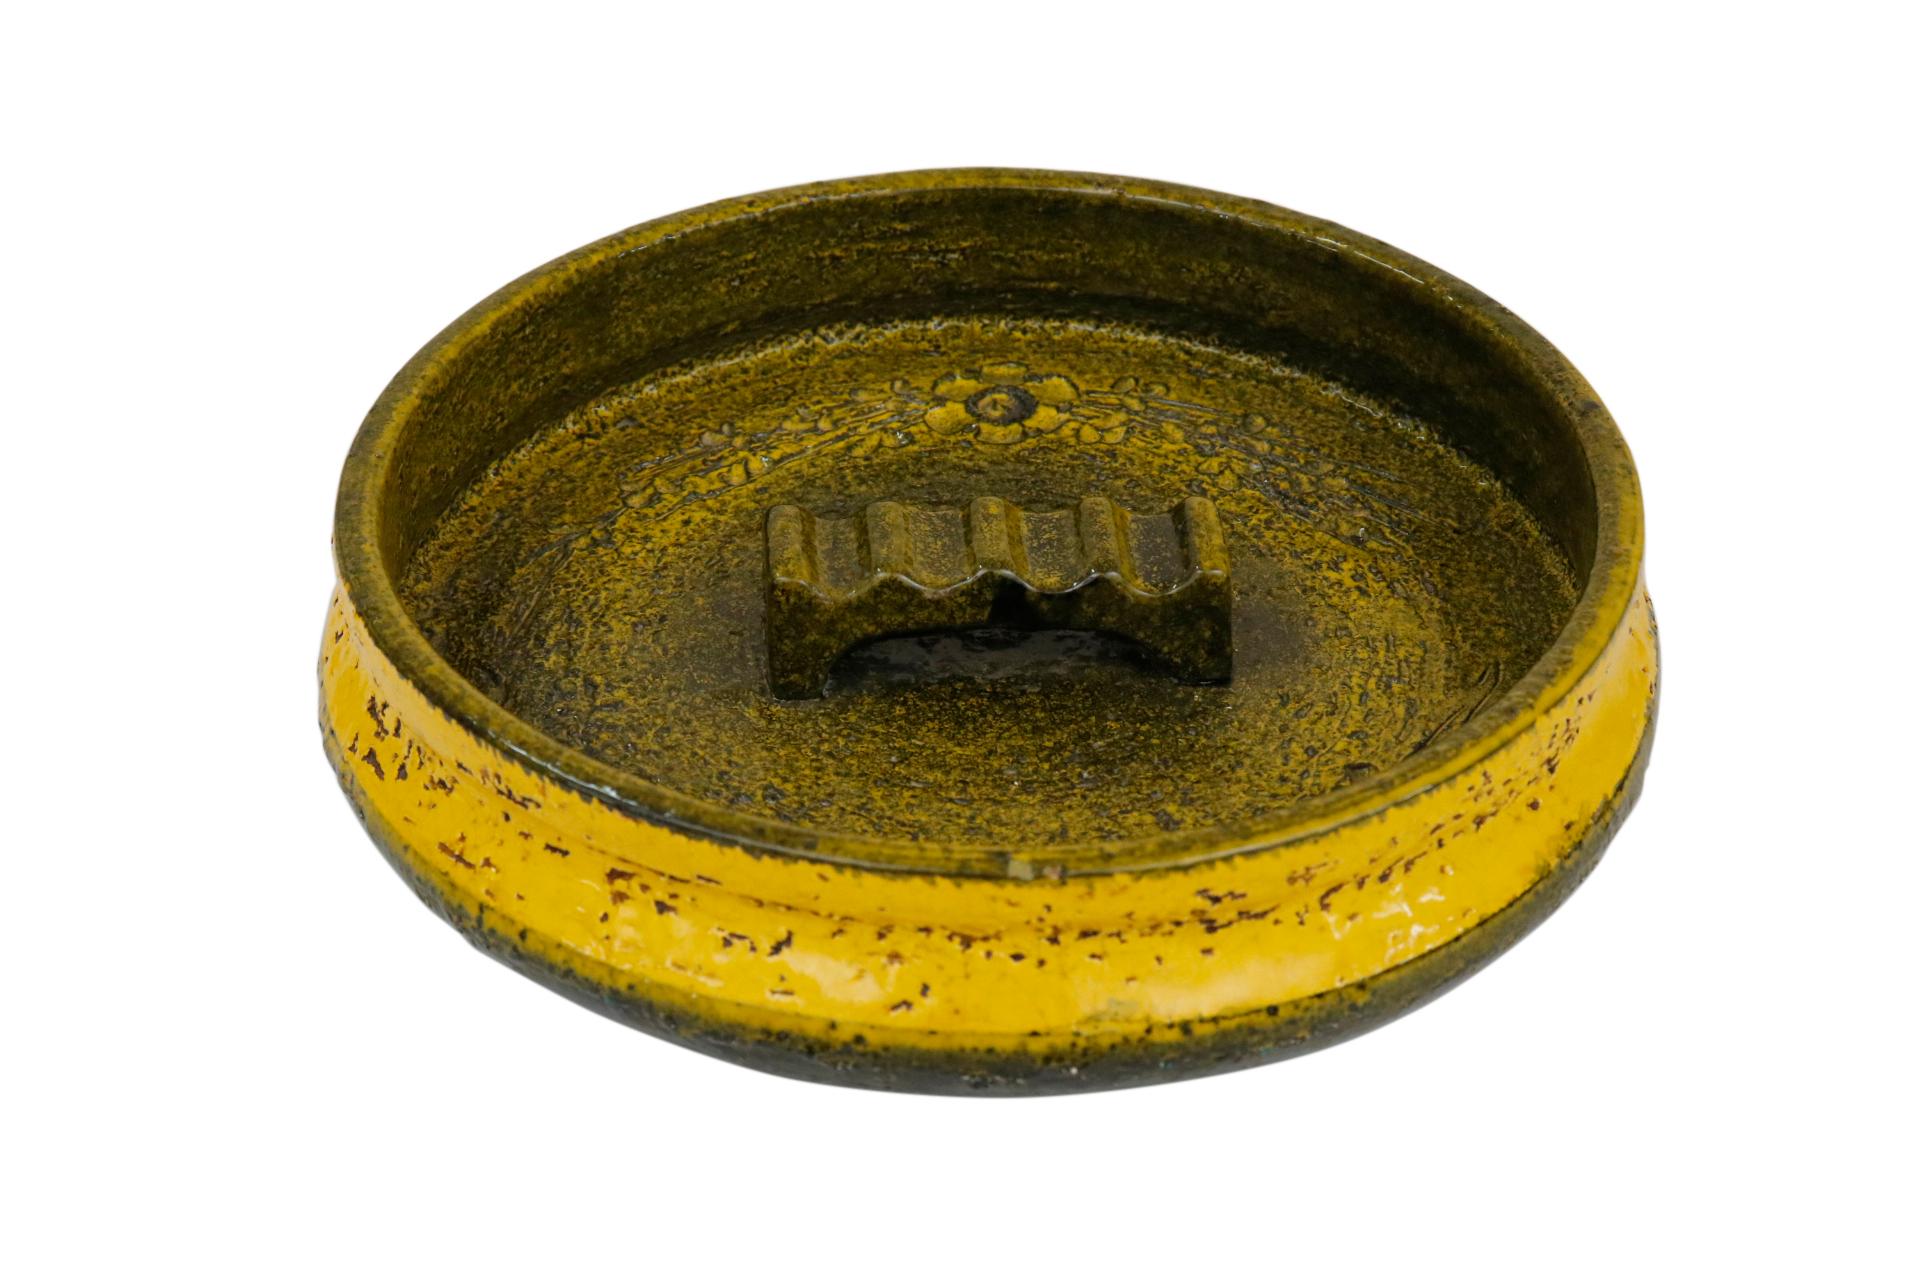 A 1950’s Aldo Londi for Bitossi Italian ceramic ashtray in yellow and olive green. Decorated with an incised floral spray motif. At the center is a raised cigarette holder. Numbered and signed “Italy” underneath.